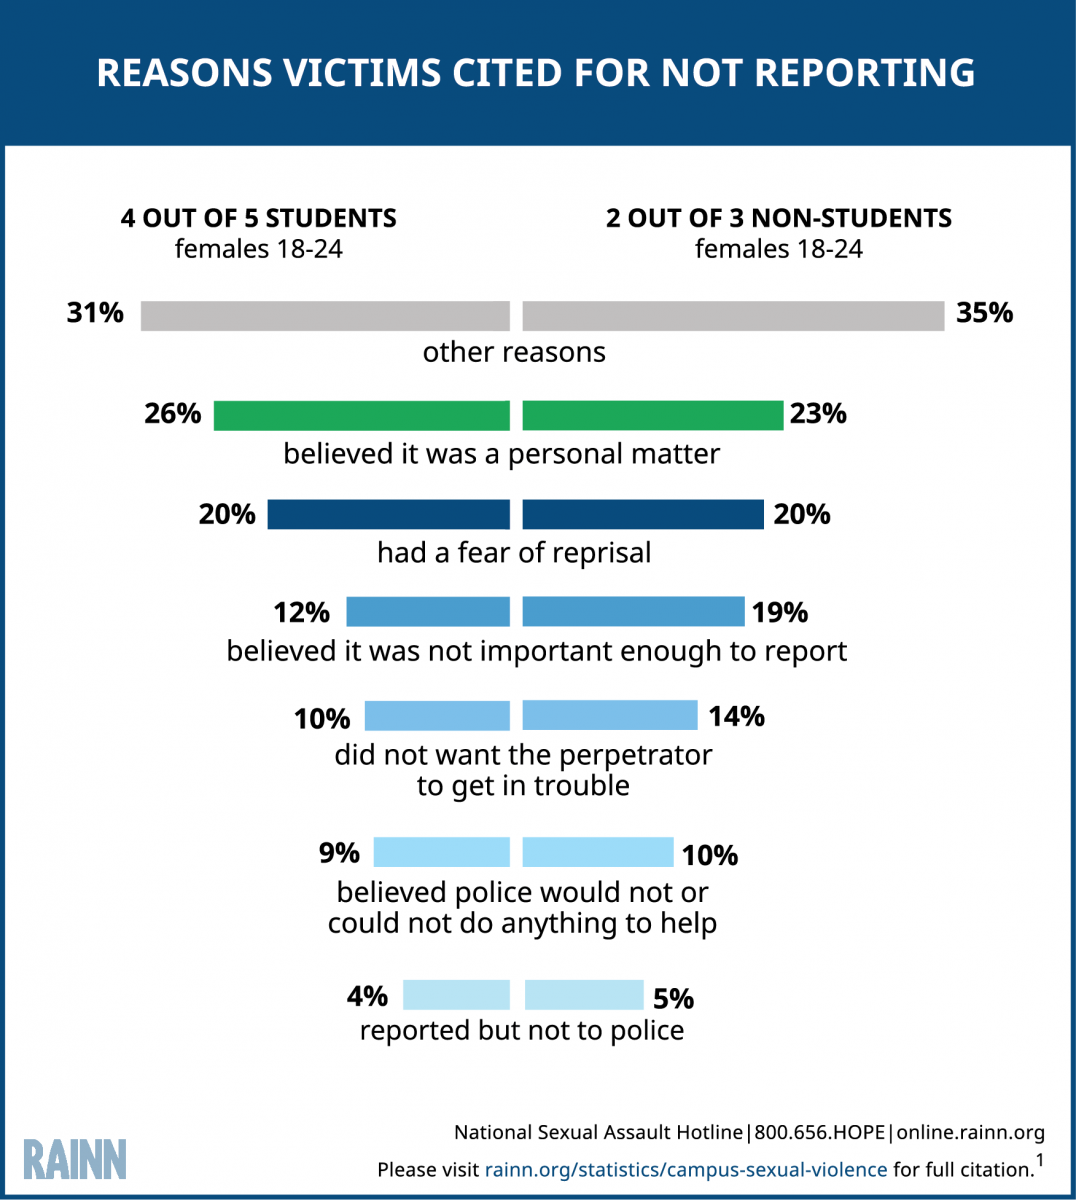 Infographic explaining reasons victims cited for not reporting a sexual assault or rape to police. For students who don't report, 26% believed it was a personal matter, 20% had fear of reprisal, 12% believed it was not important enough to report, 10% did not want the perpetrator to get in trouble, 9% believed police would not or could not help, 4% reported but not to police, and 31% cited other reasons. For non-students who didn't report, 23% believed it was a personal matter, 20% feared reprisal, 19% thought it was not important enough to report, 14% didn't want the perpetrator to get in trouble, 10% believed the police would not or could not help, 5% reported but not to police, and 35% cited other reasons. 